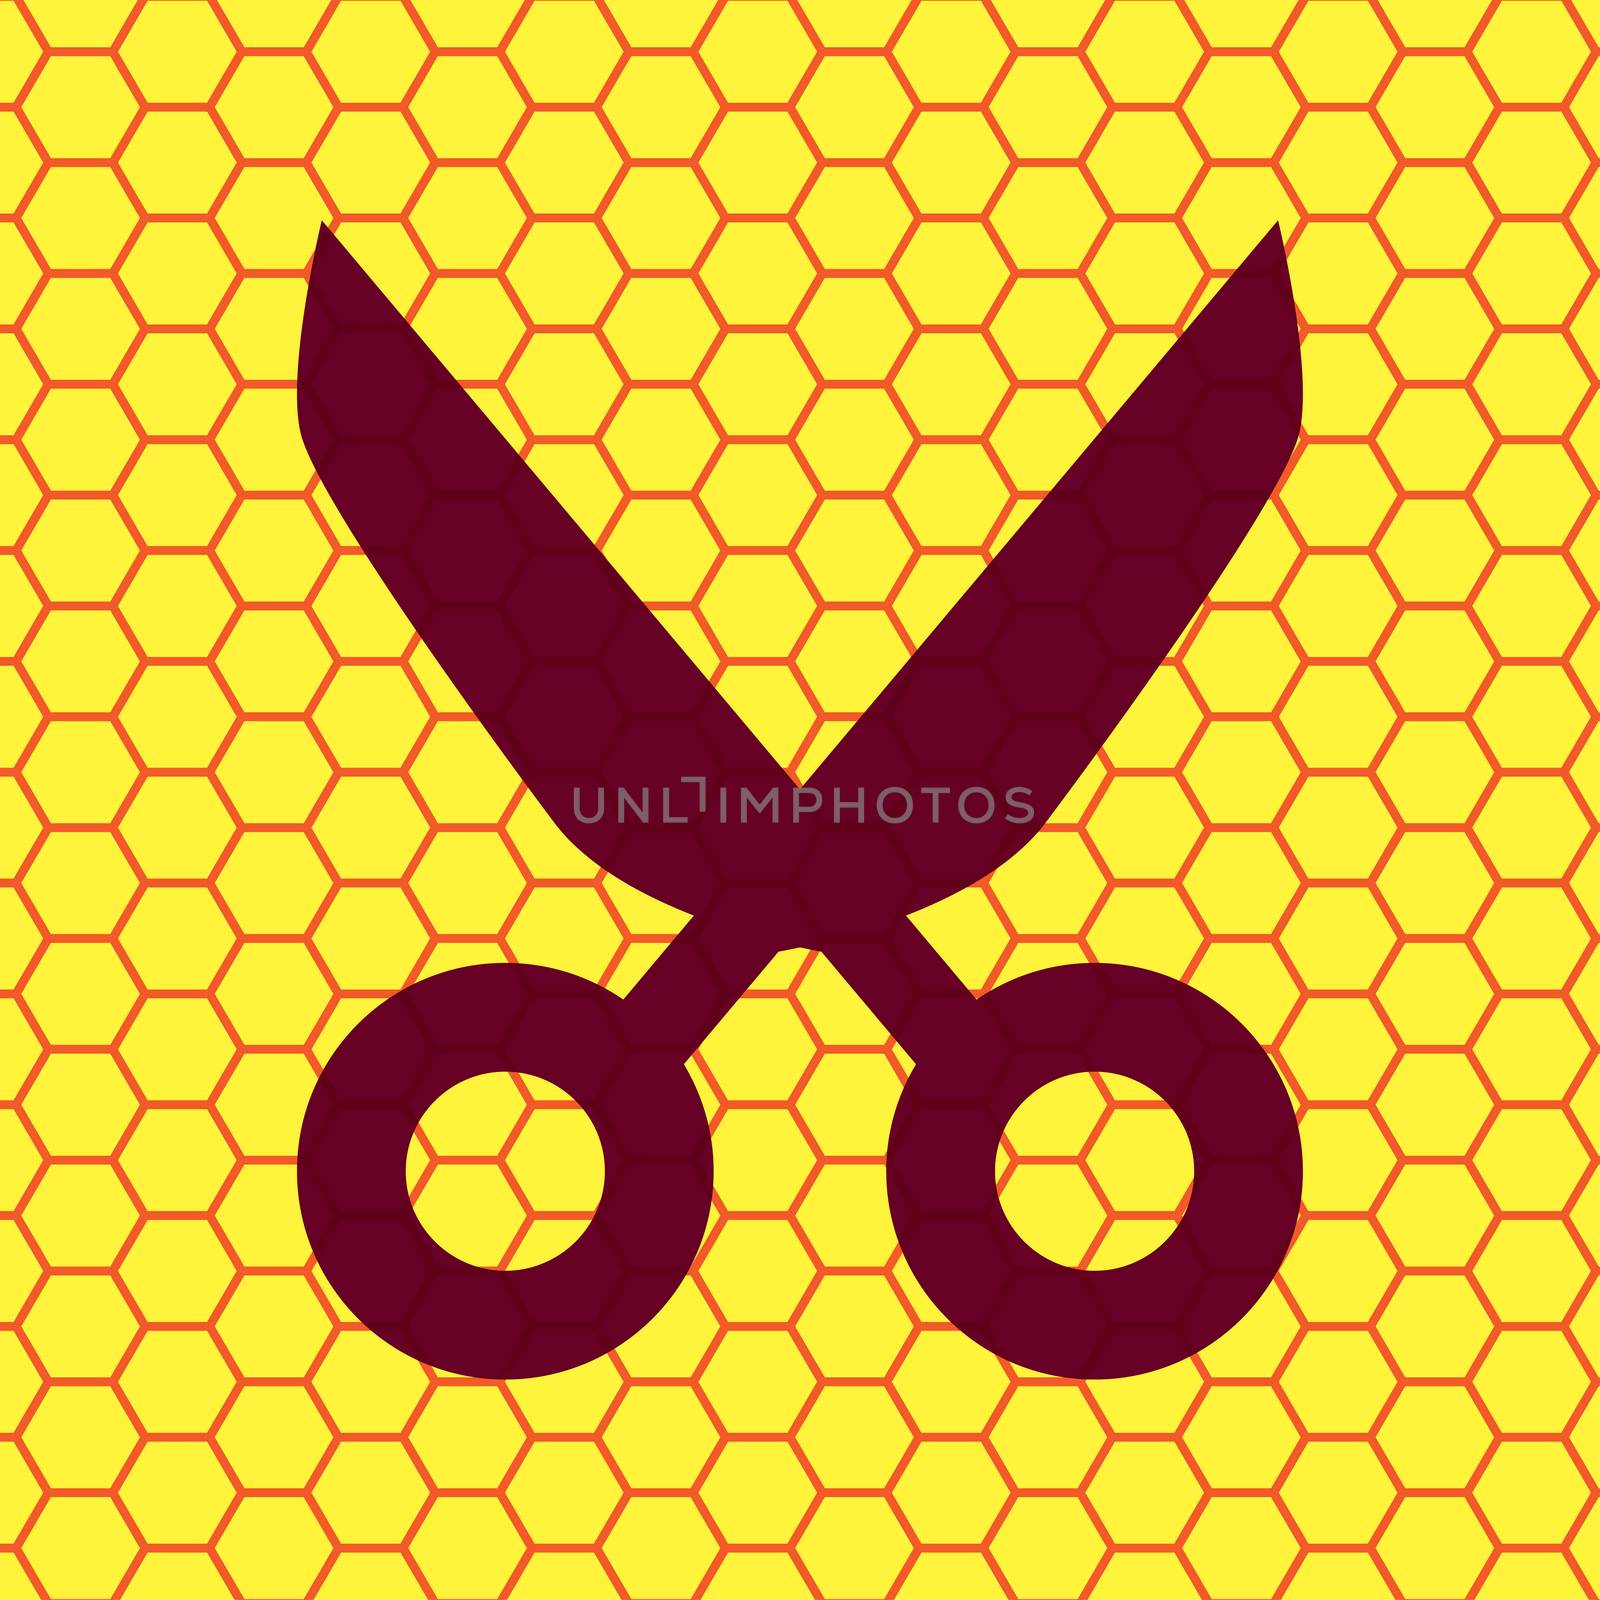 Scissors icon Flat with abstract background.